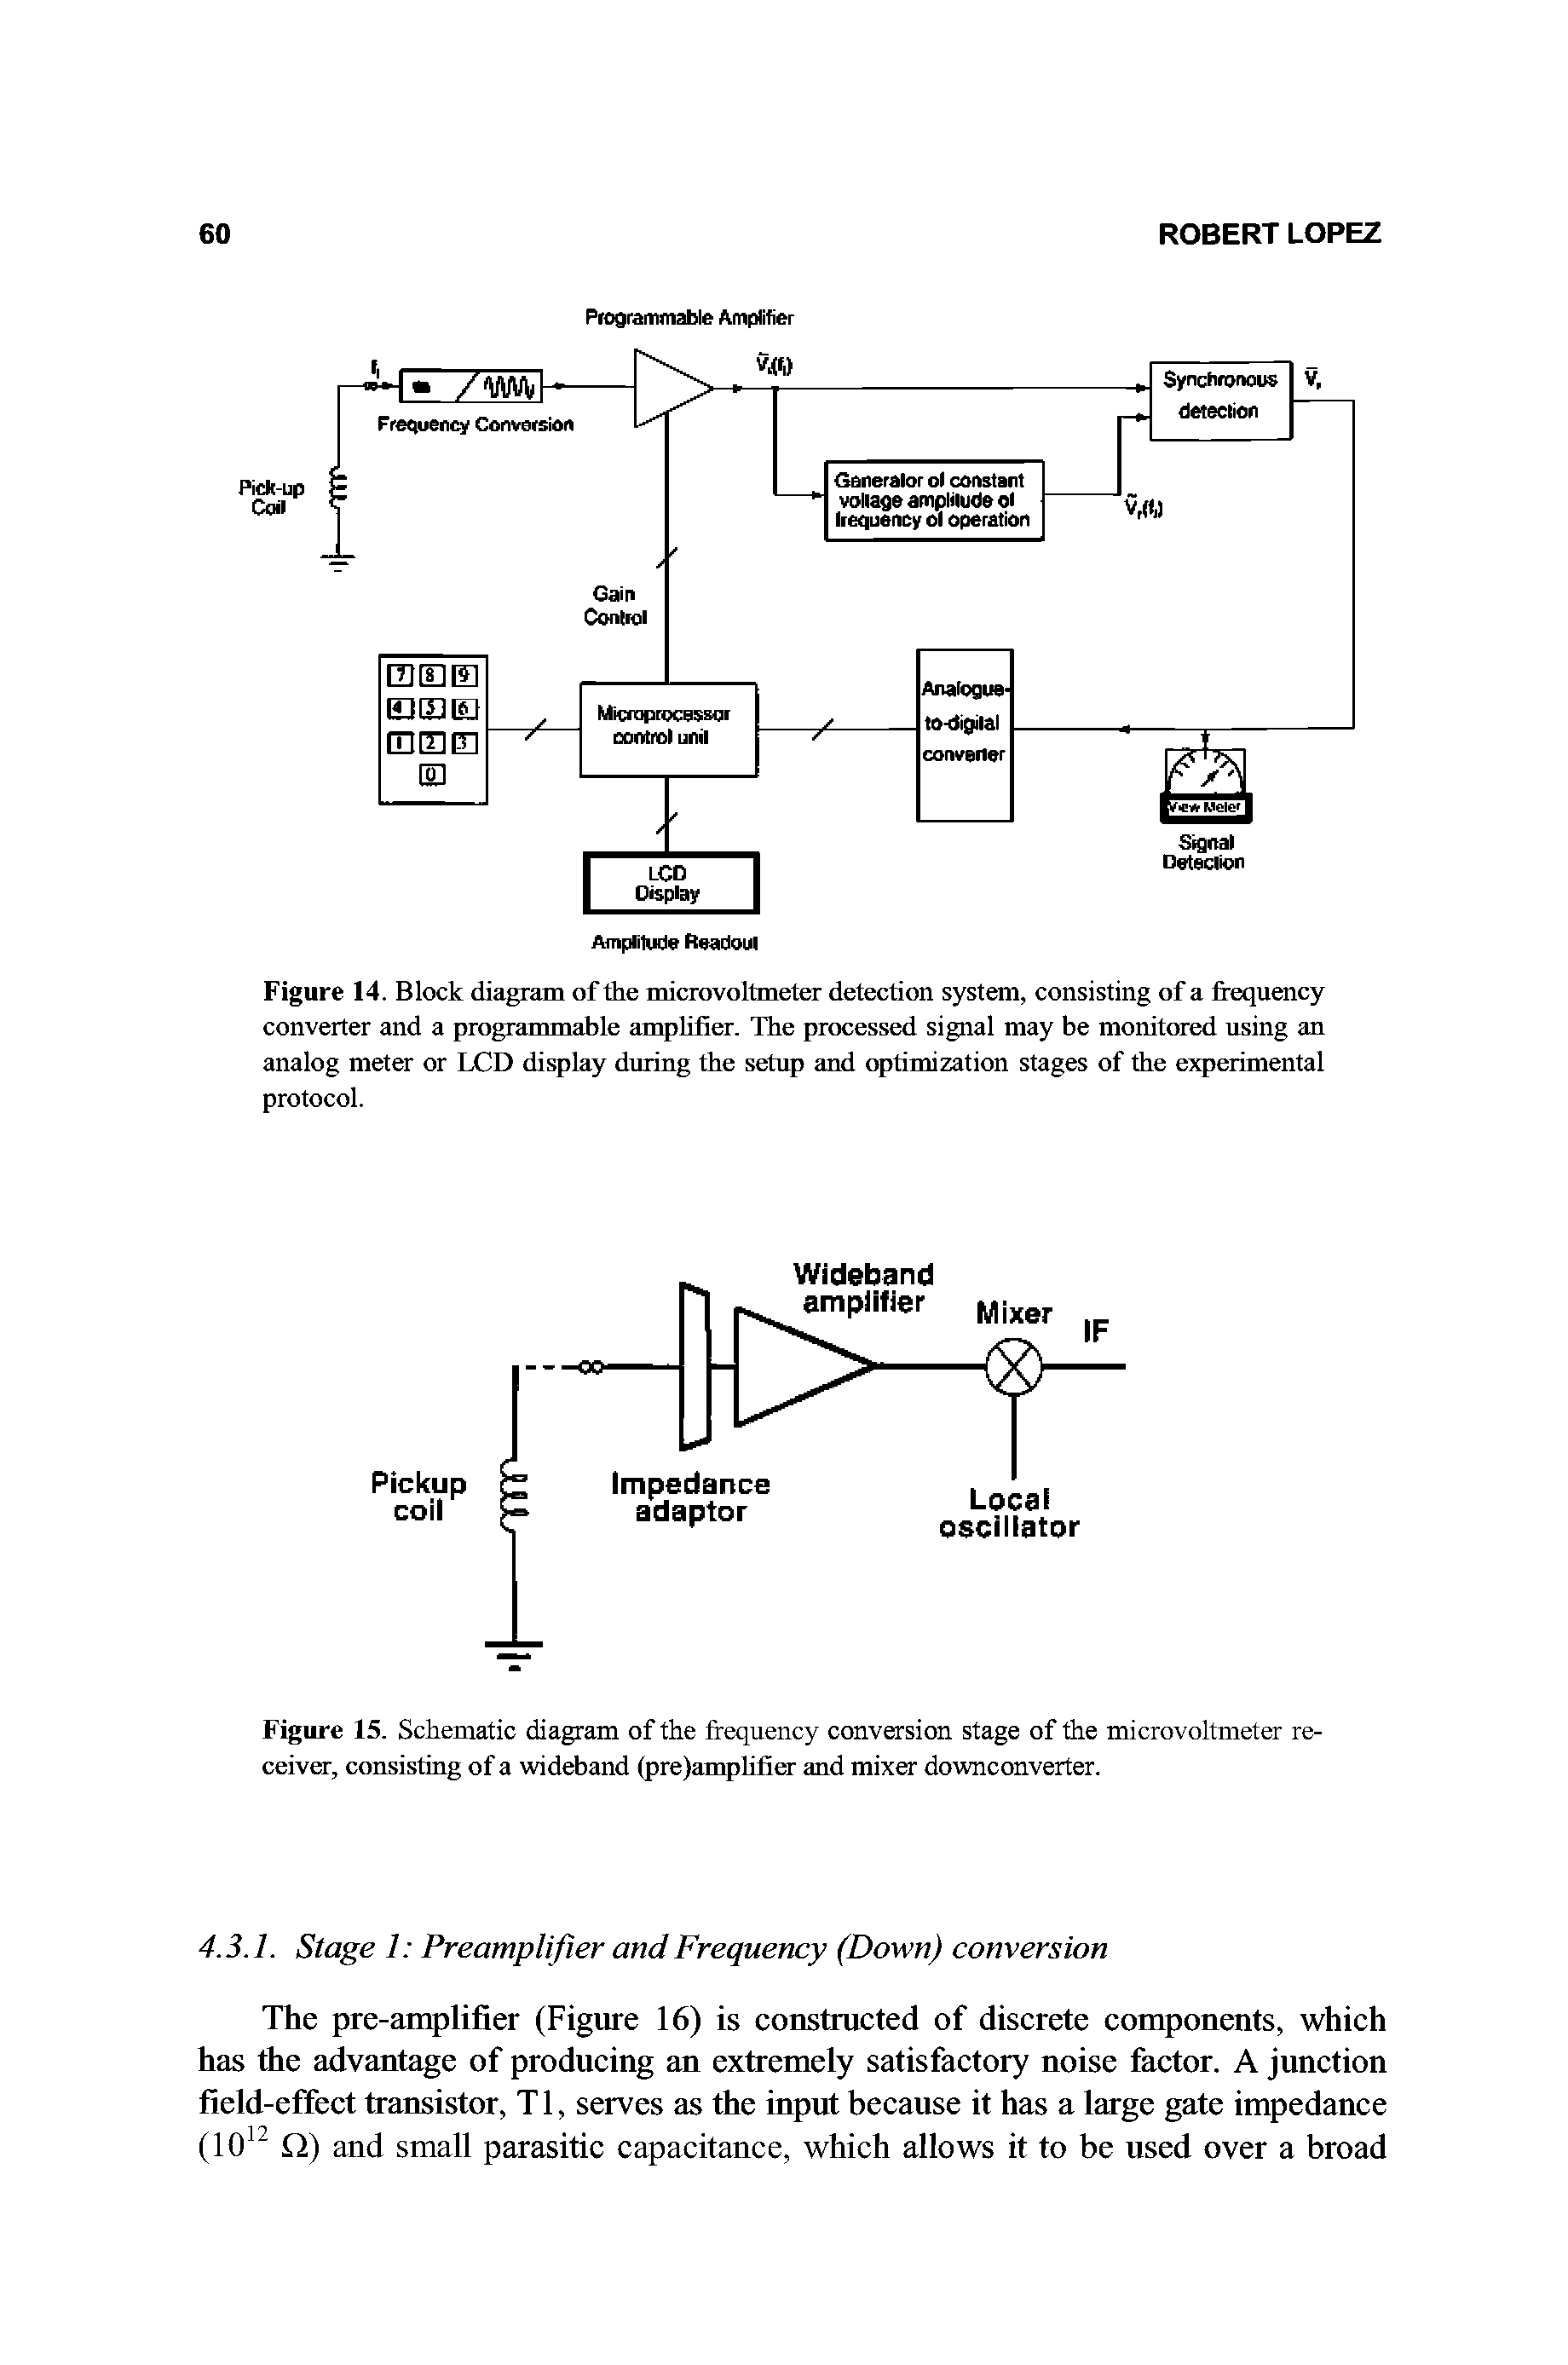 Figure 14. Block diagram of the microvoltmeter detection system, consisting of a frequency converter and a programmable amplifier. The processed signal may be monitored using an analog meter or LCD display during the setup and optimization stages of the experimental protocol.